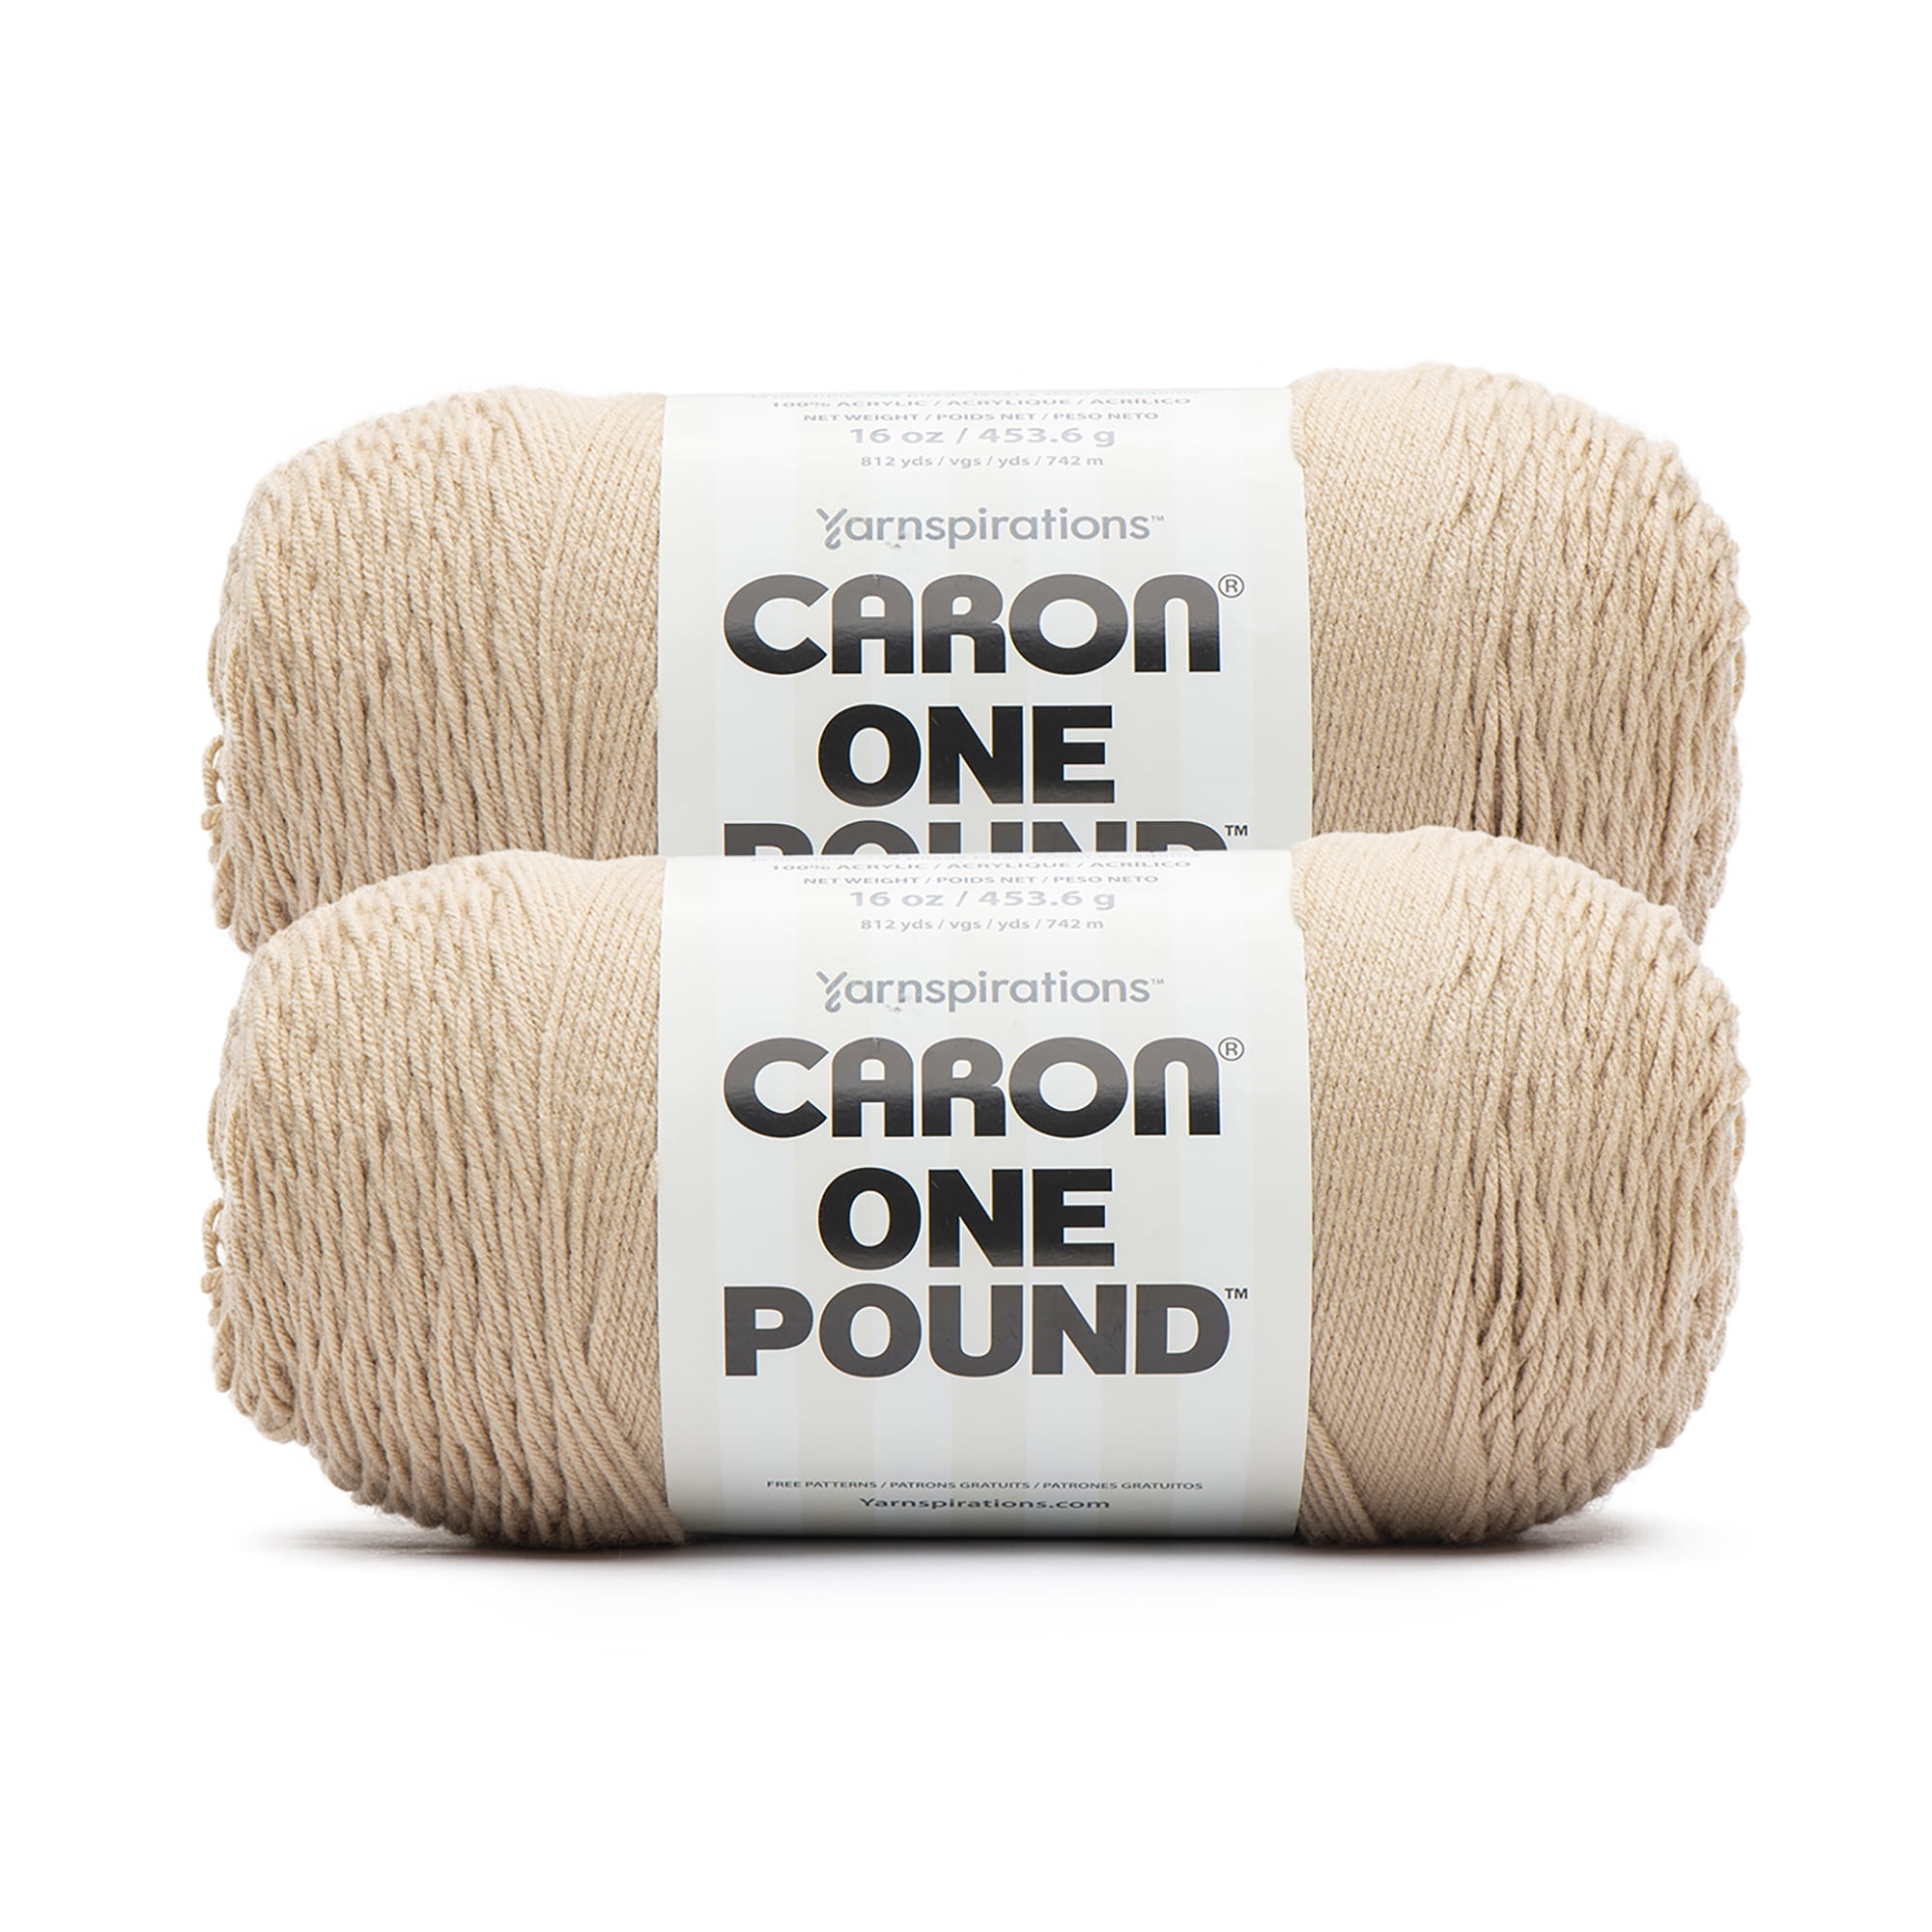 Caron ONE POUND Yarn 100% Acrylic Worsted Weight 4 ply color Lace 585